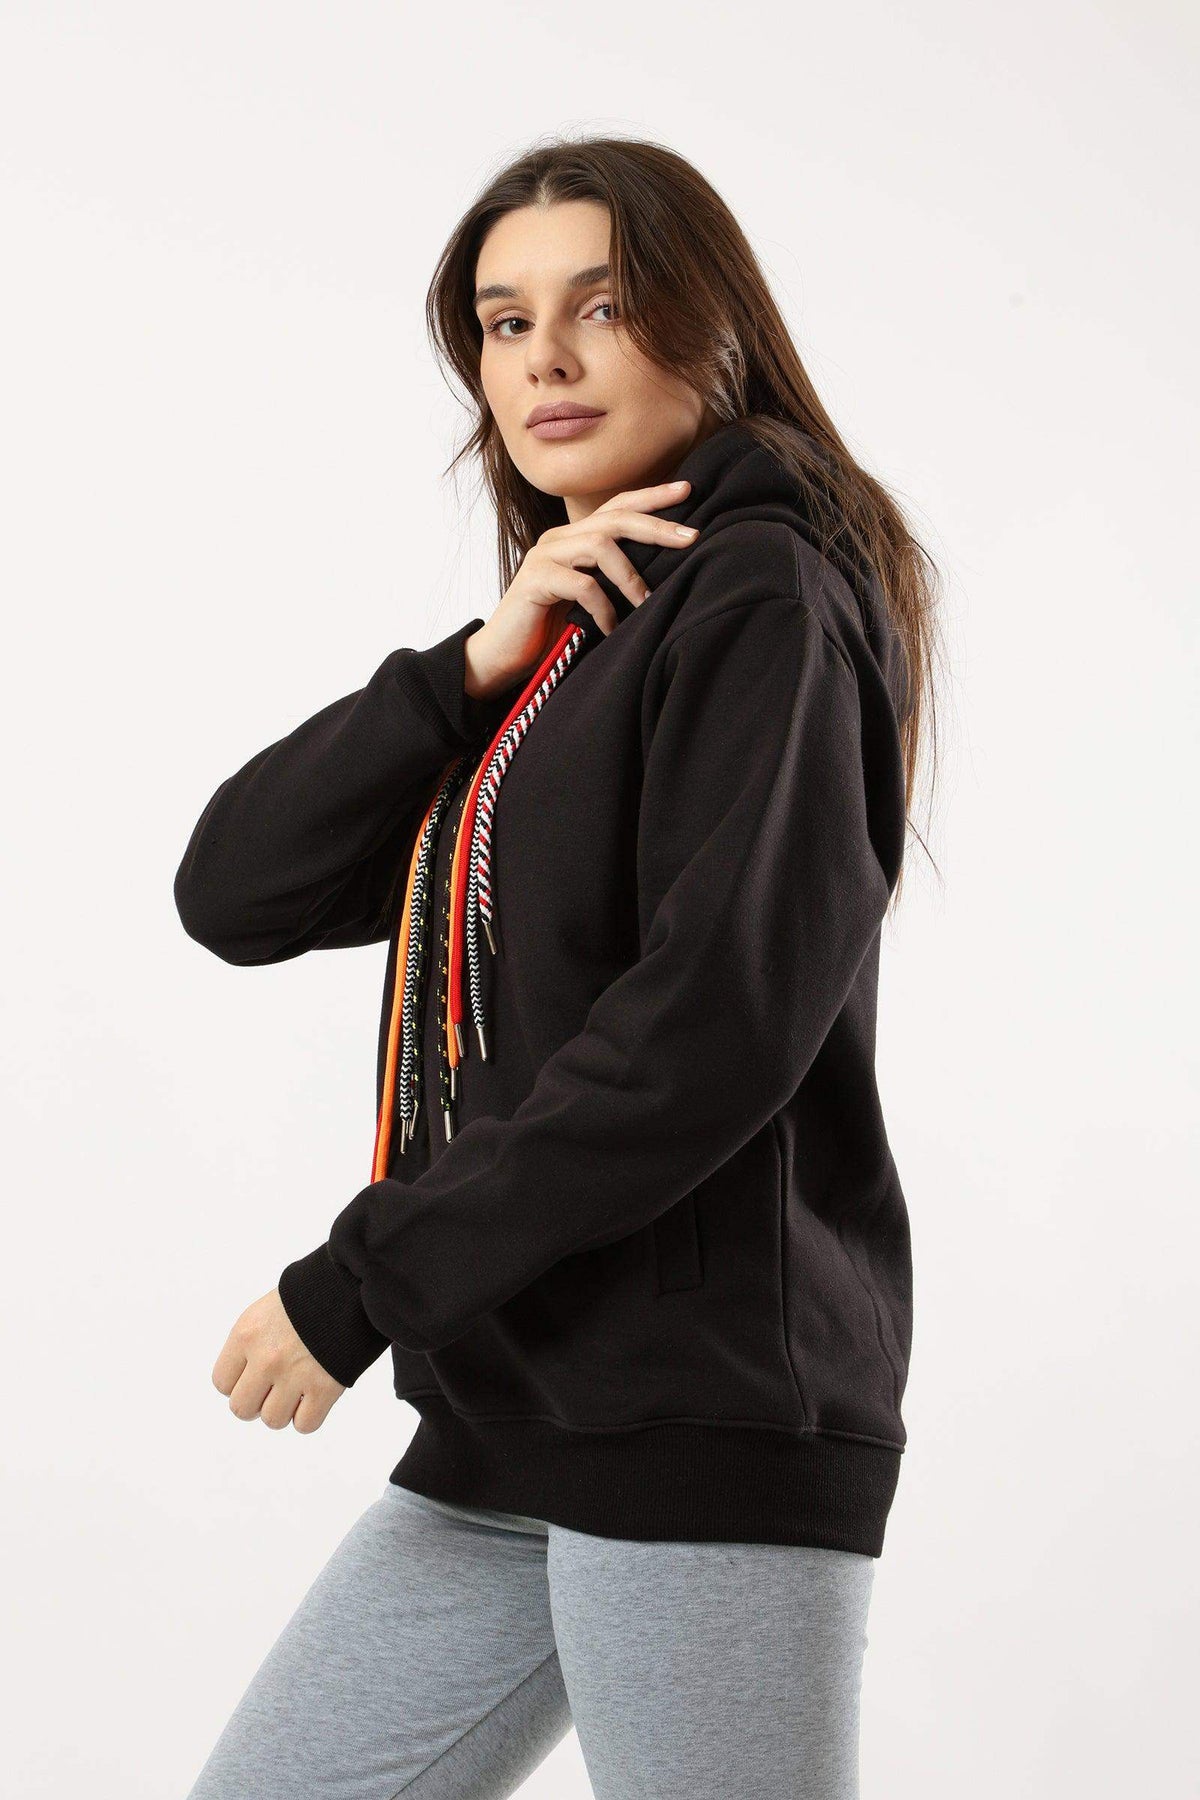 Plain Hoodie with Colorful Drawstrings - Carina - كارينا